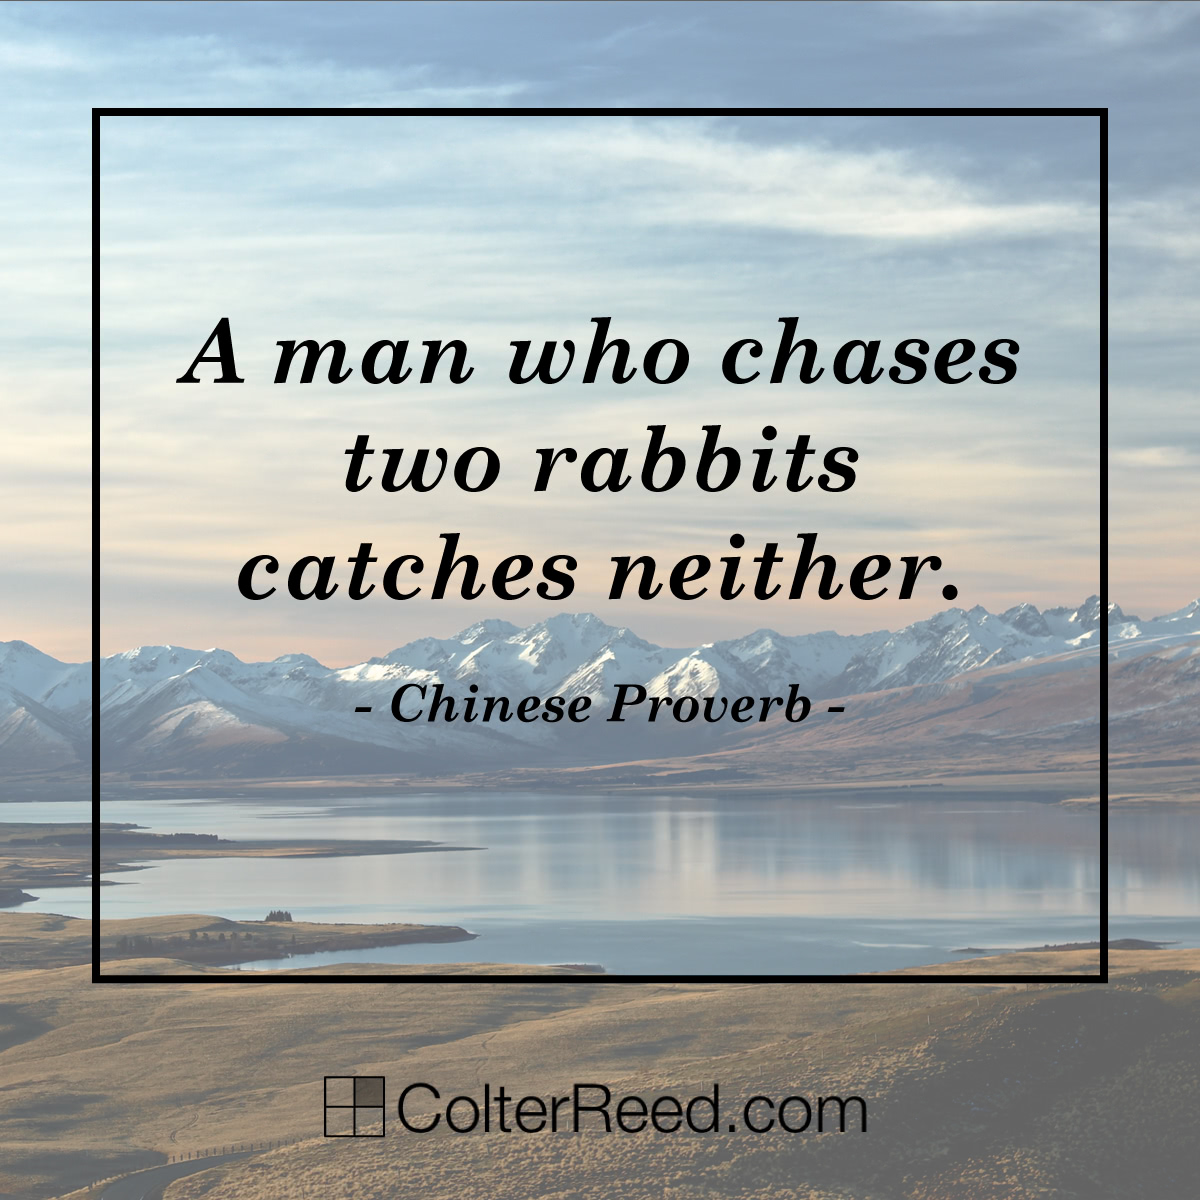 A man who chases two rabbits catches neither. —Chinese Proverb